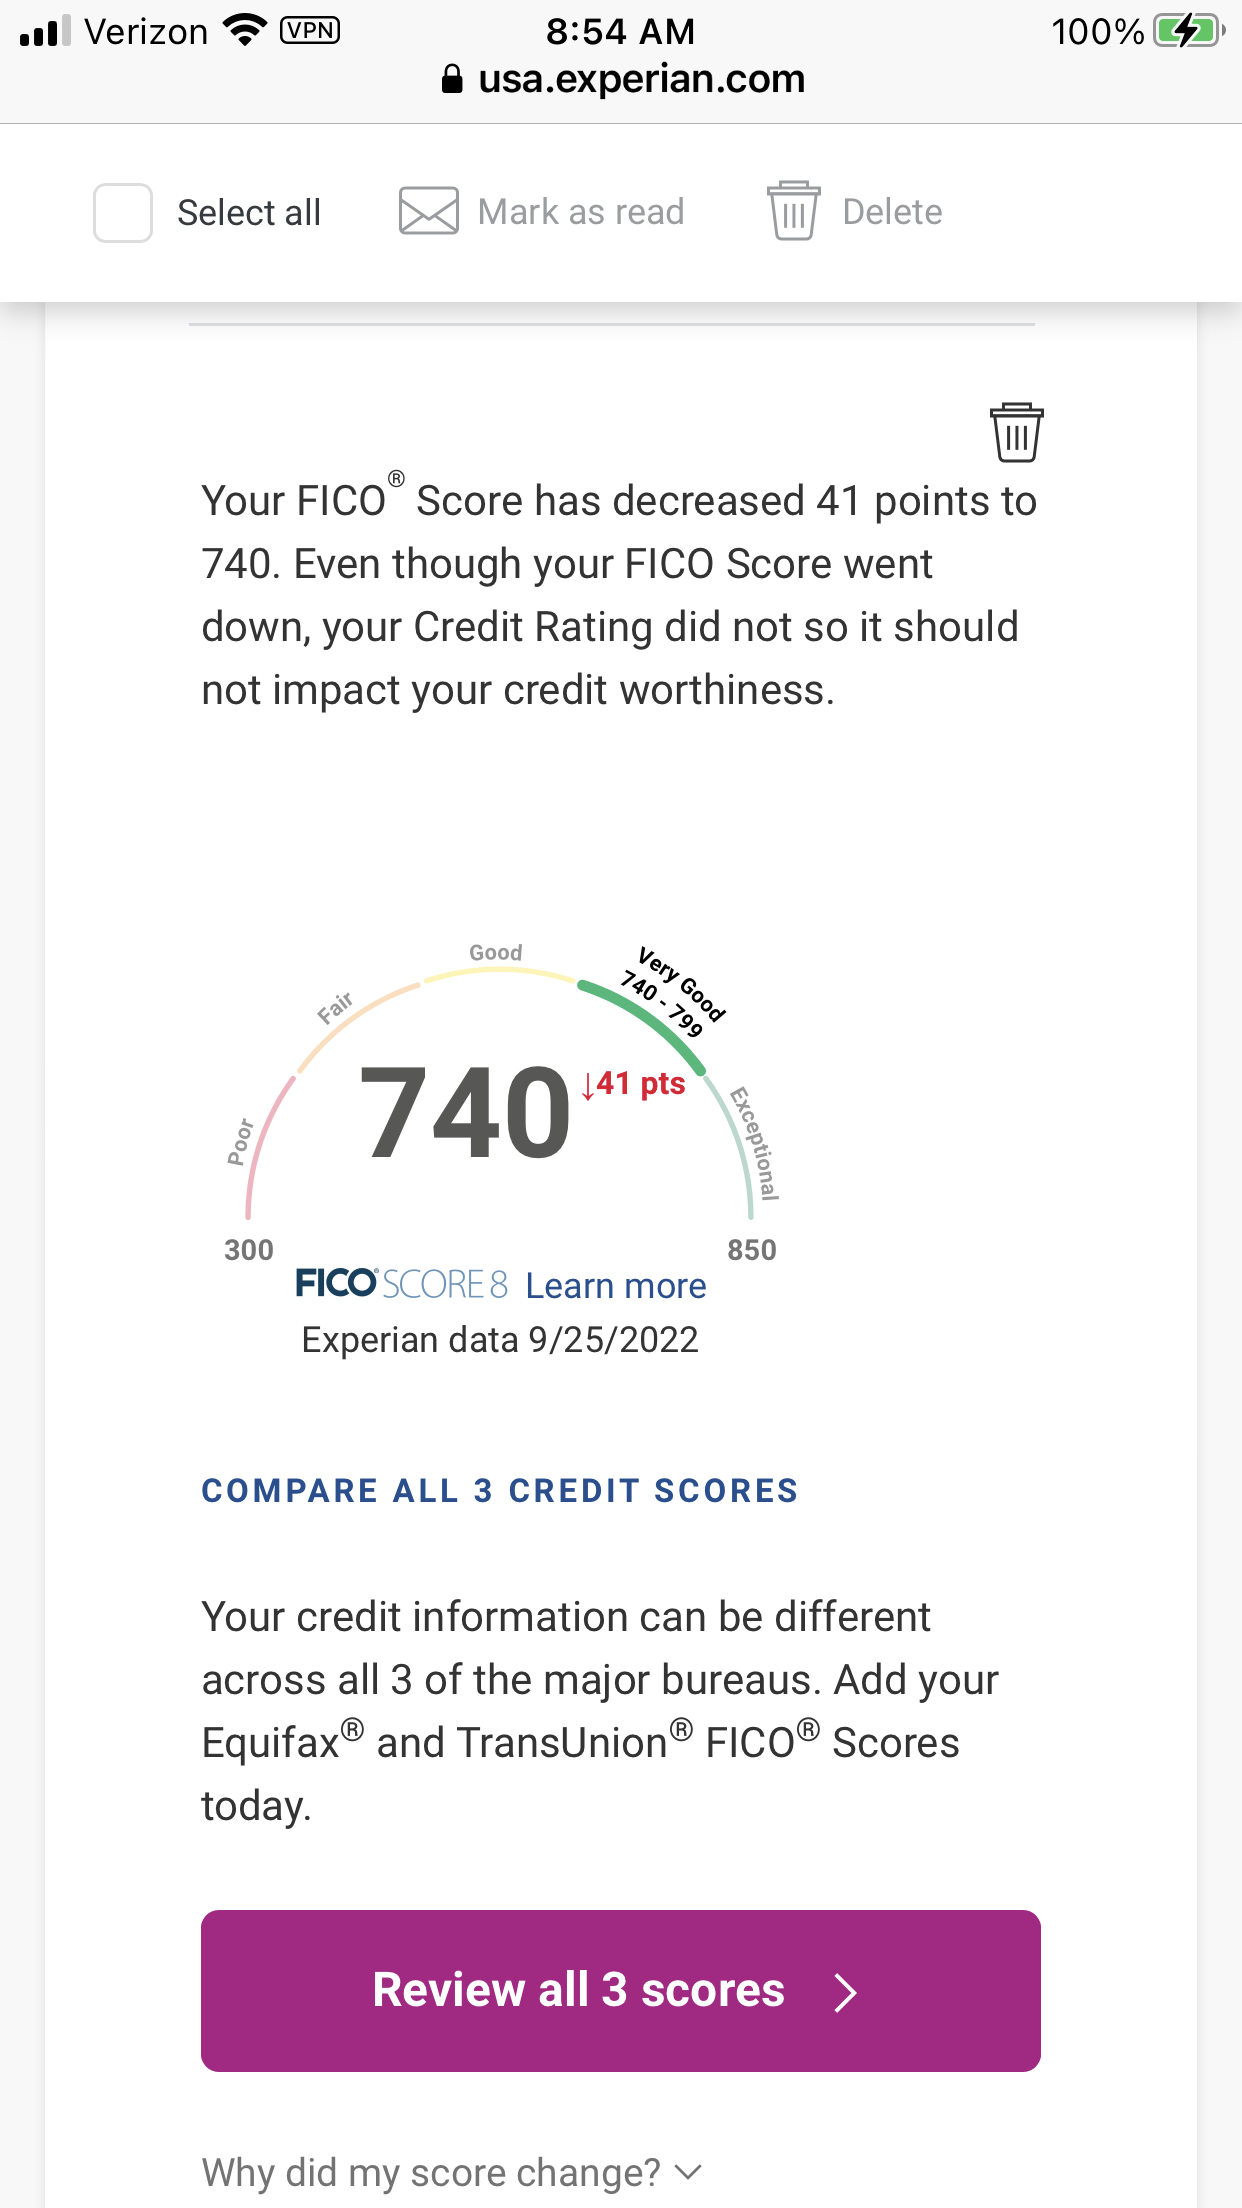 Emails and FICO scores